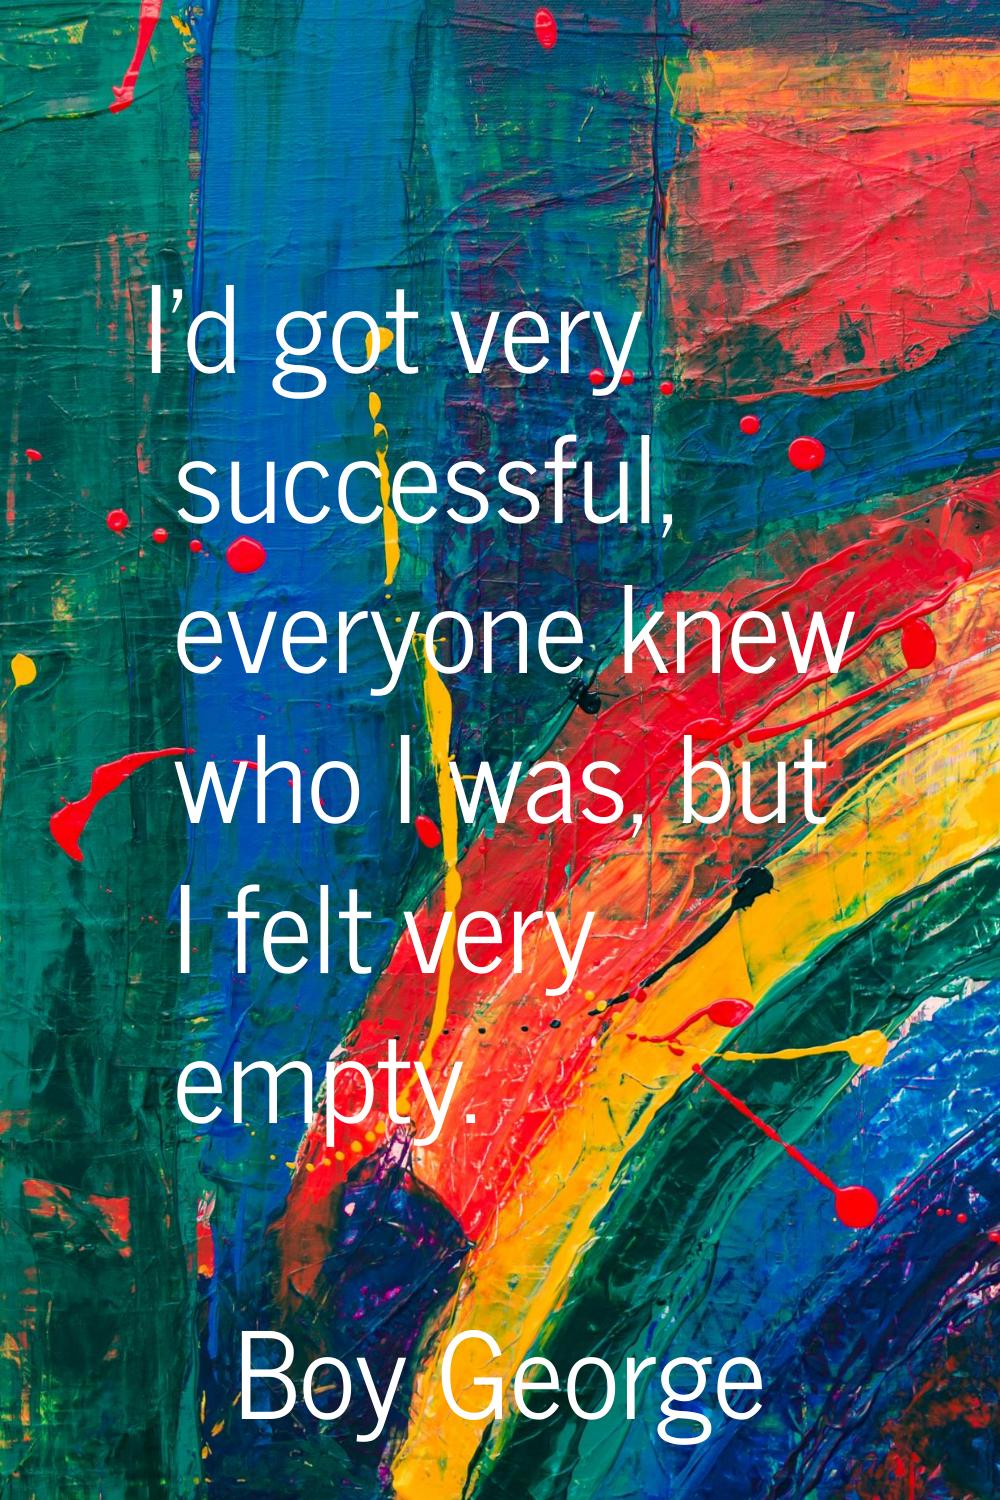 I'd got very successful, everyone knew who I was, but I felt very empty.